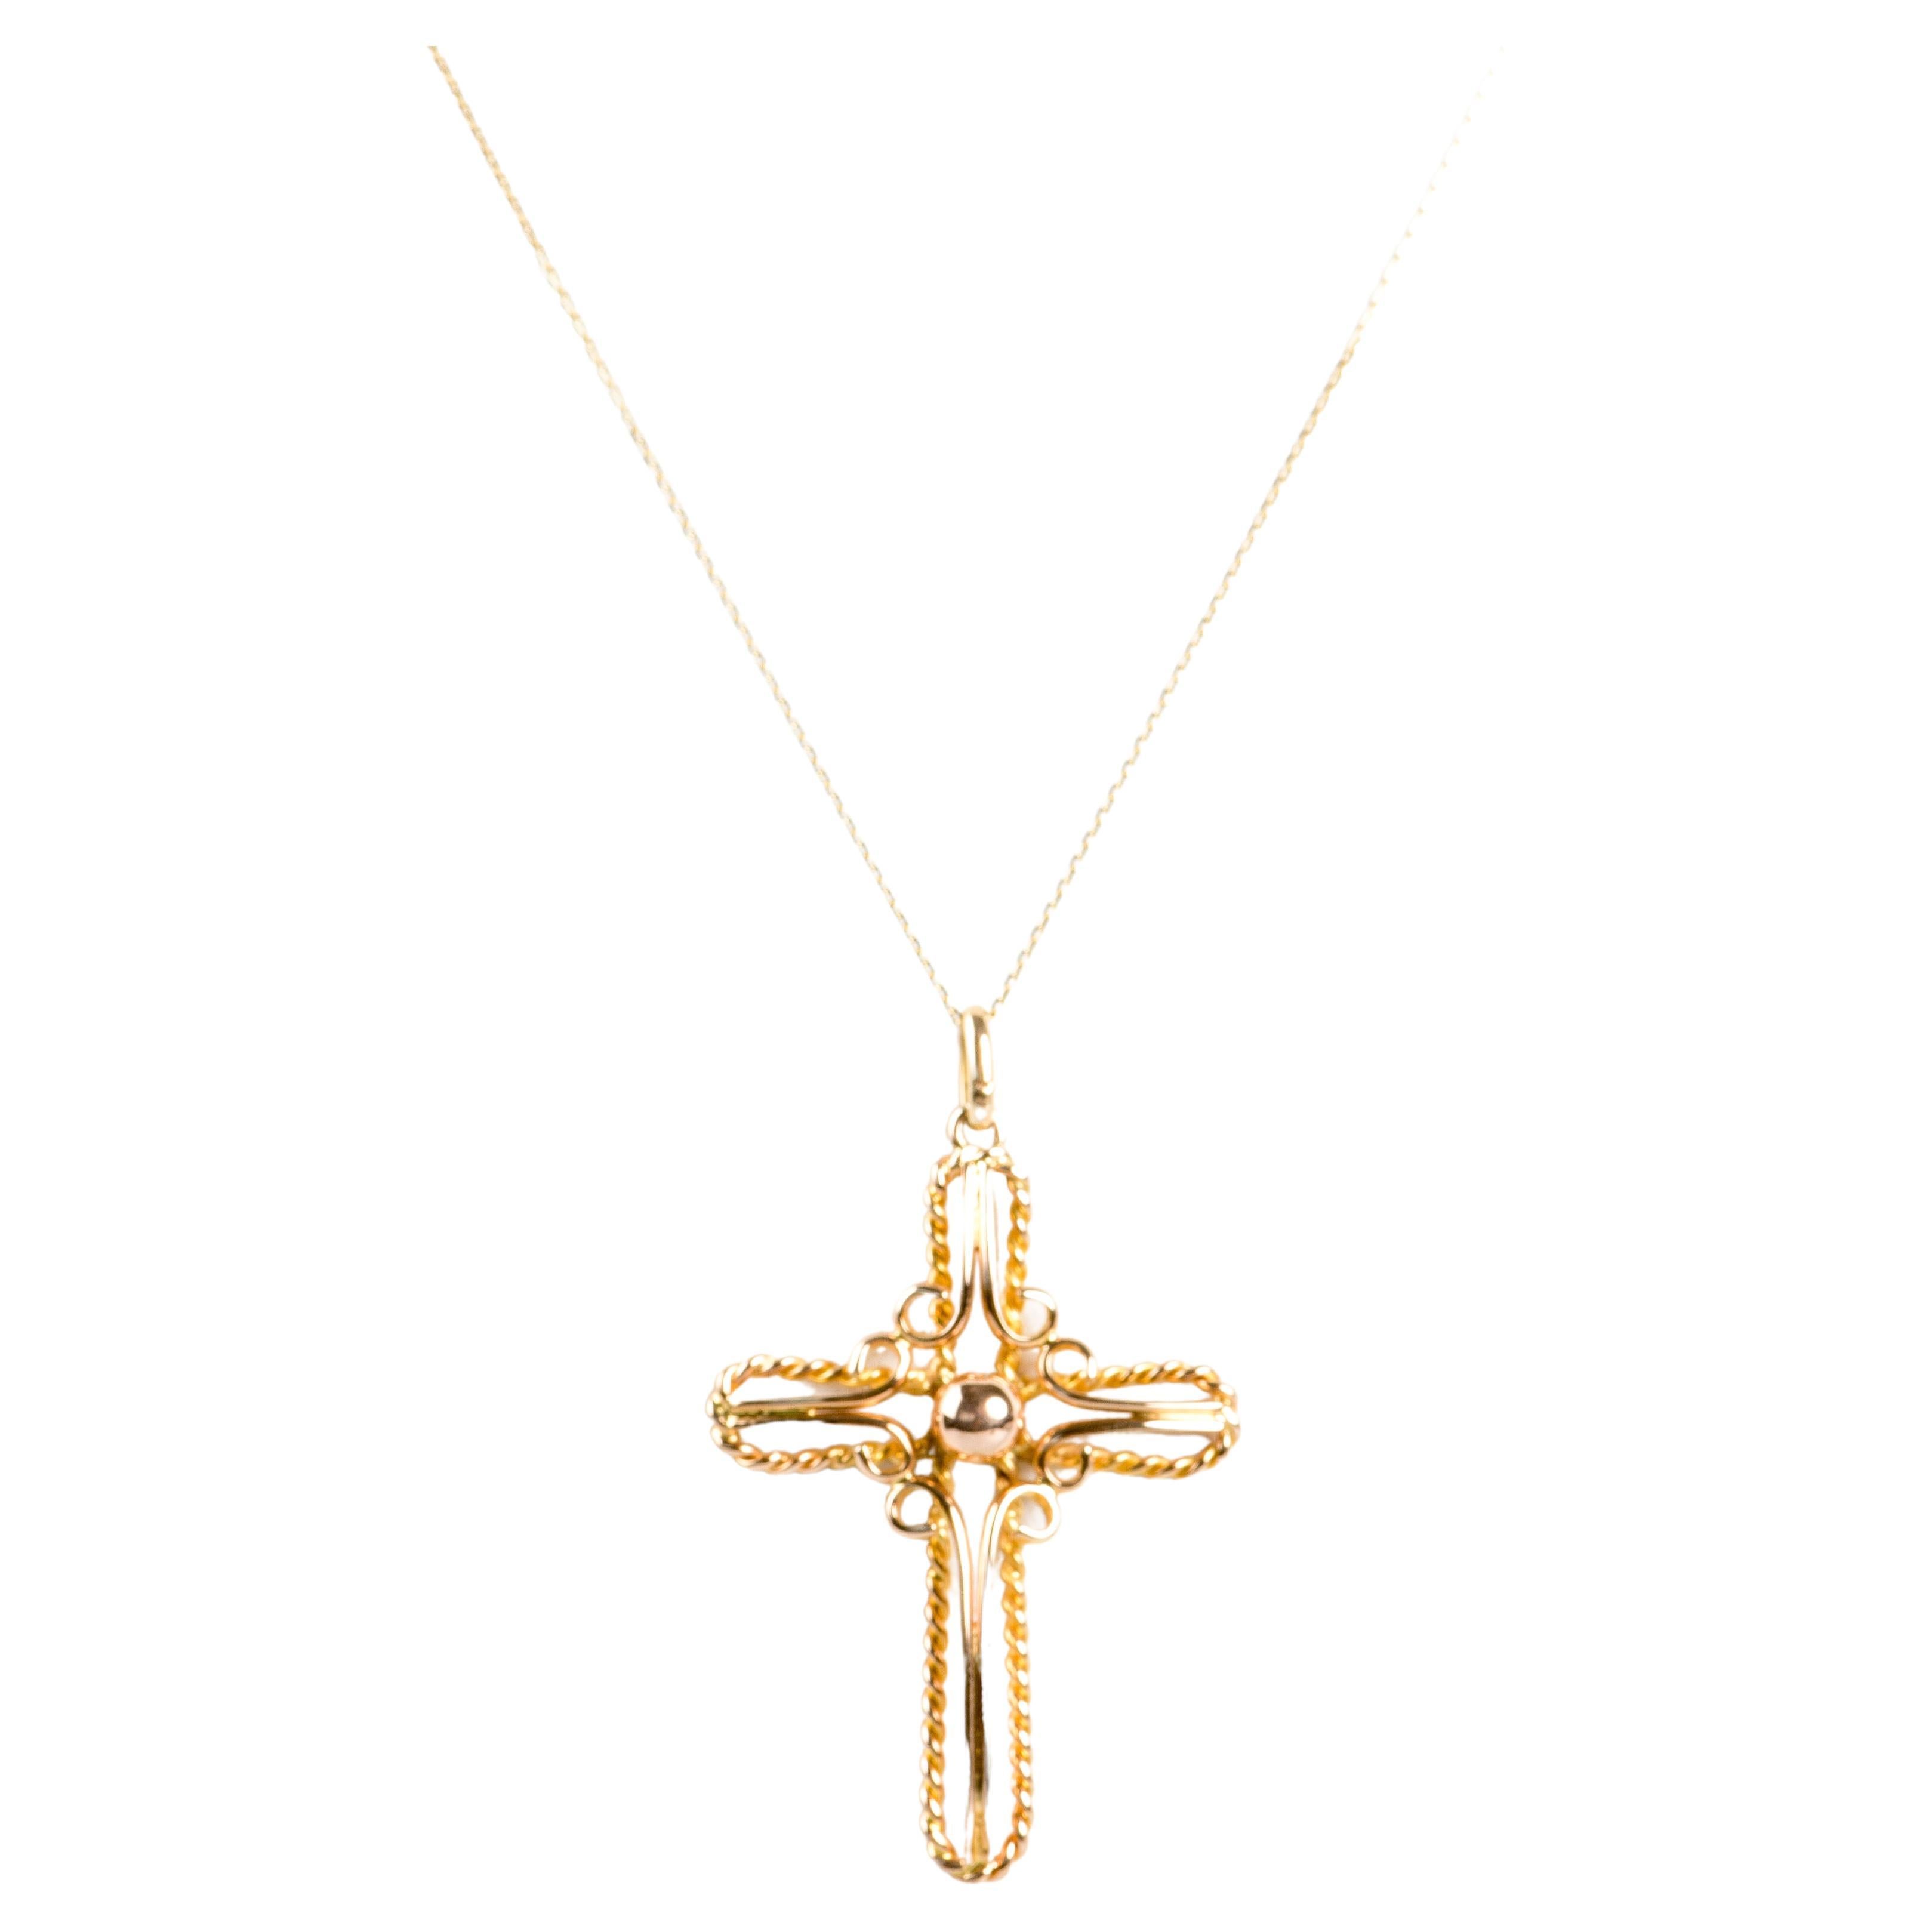 Knitted necklace with cross-shaped pendant in 18K yellow gold.  For Sale